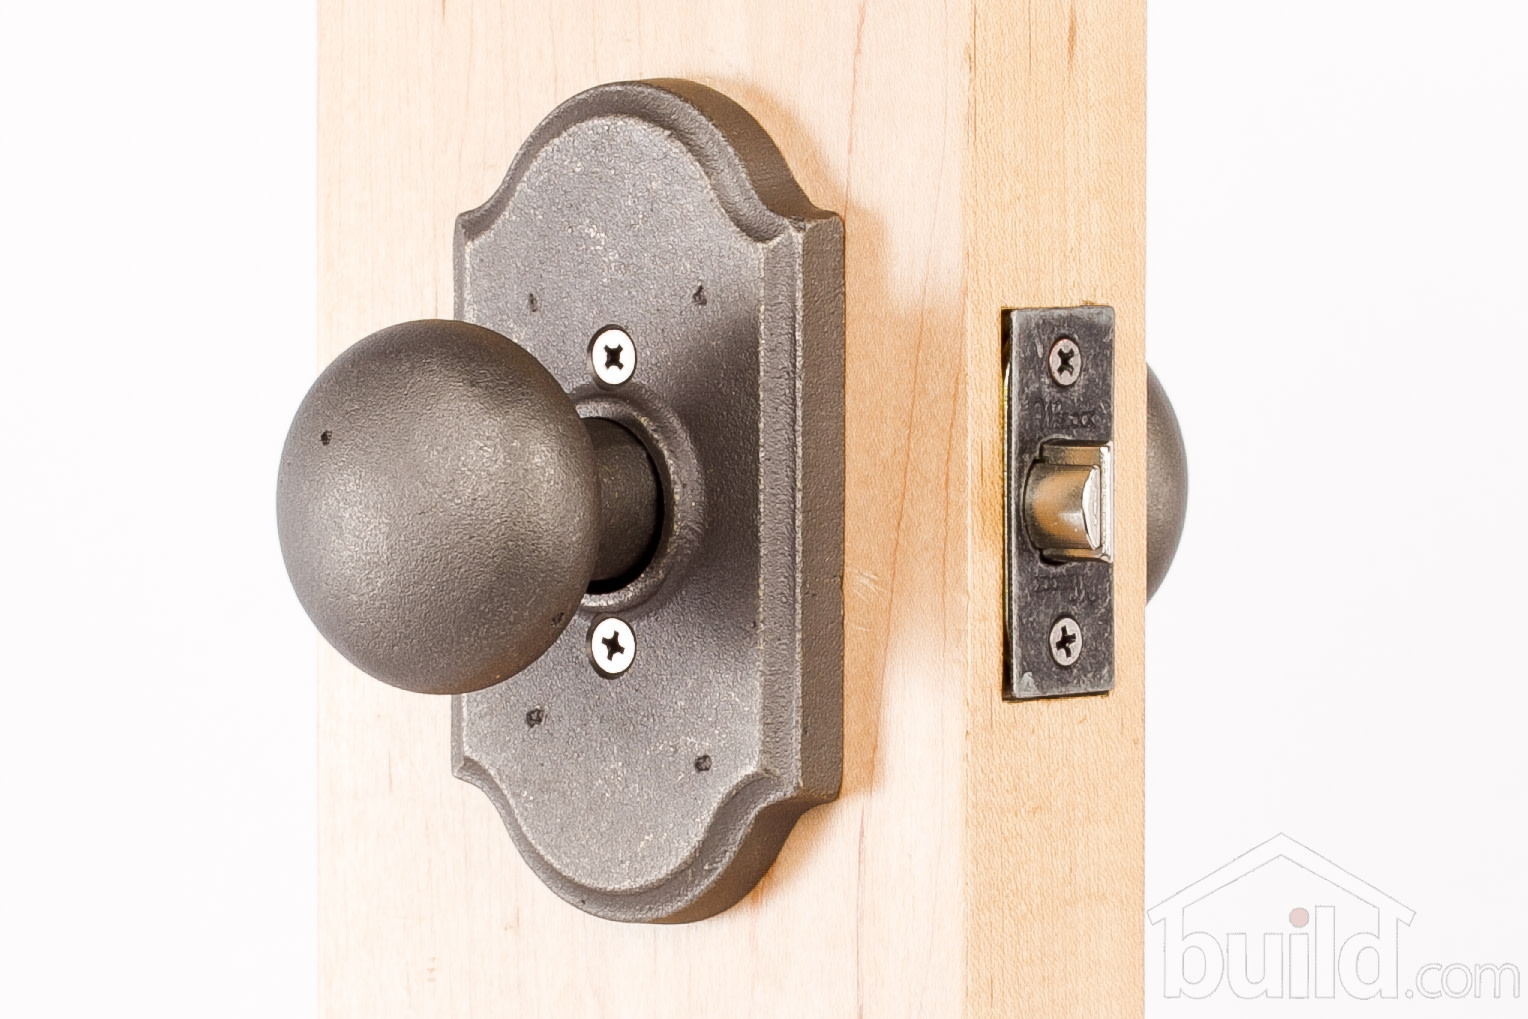 Weslock 07140F1F1SL23 Wexford Premiere Entry Lock with Adjustable Latch and Full Lip Strike Oil Rubbed Bronze Finish - image 2 of 7